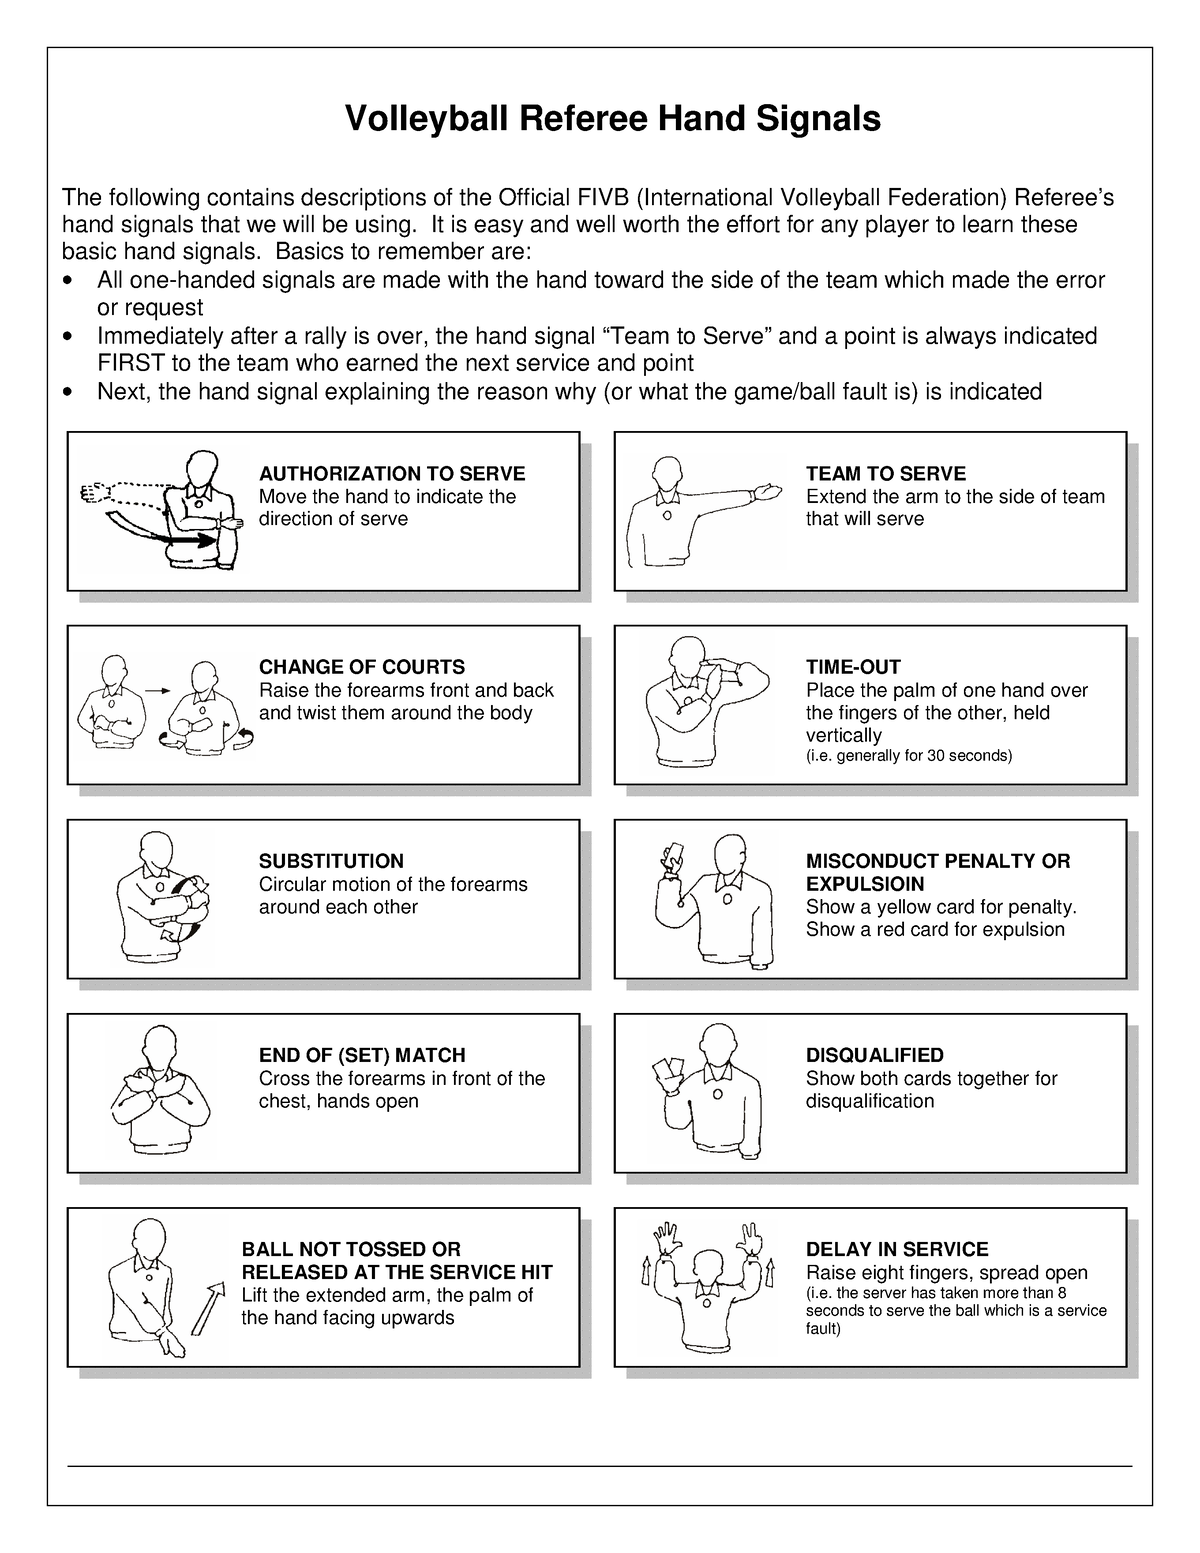 authorization to serve volleyball hand signal